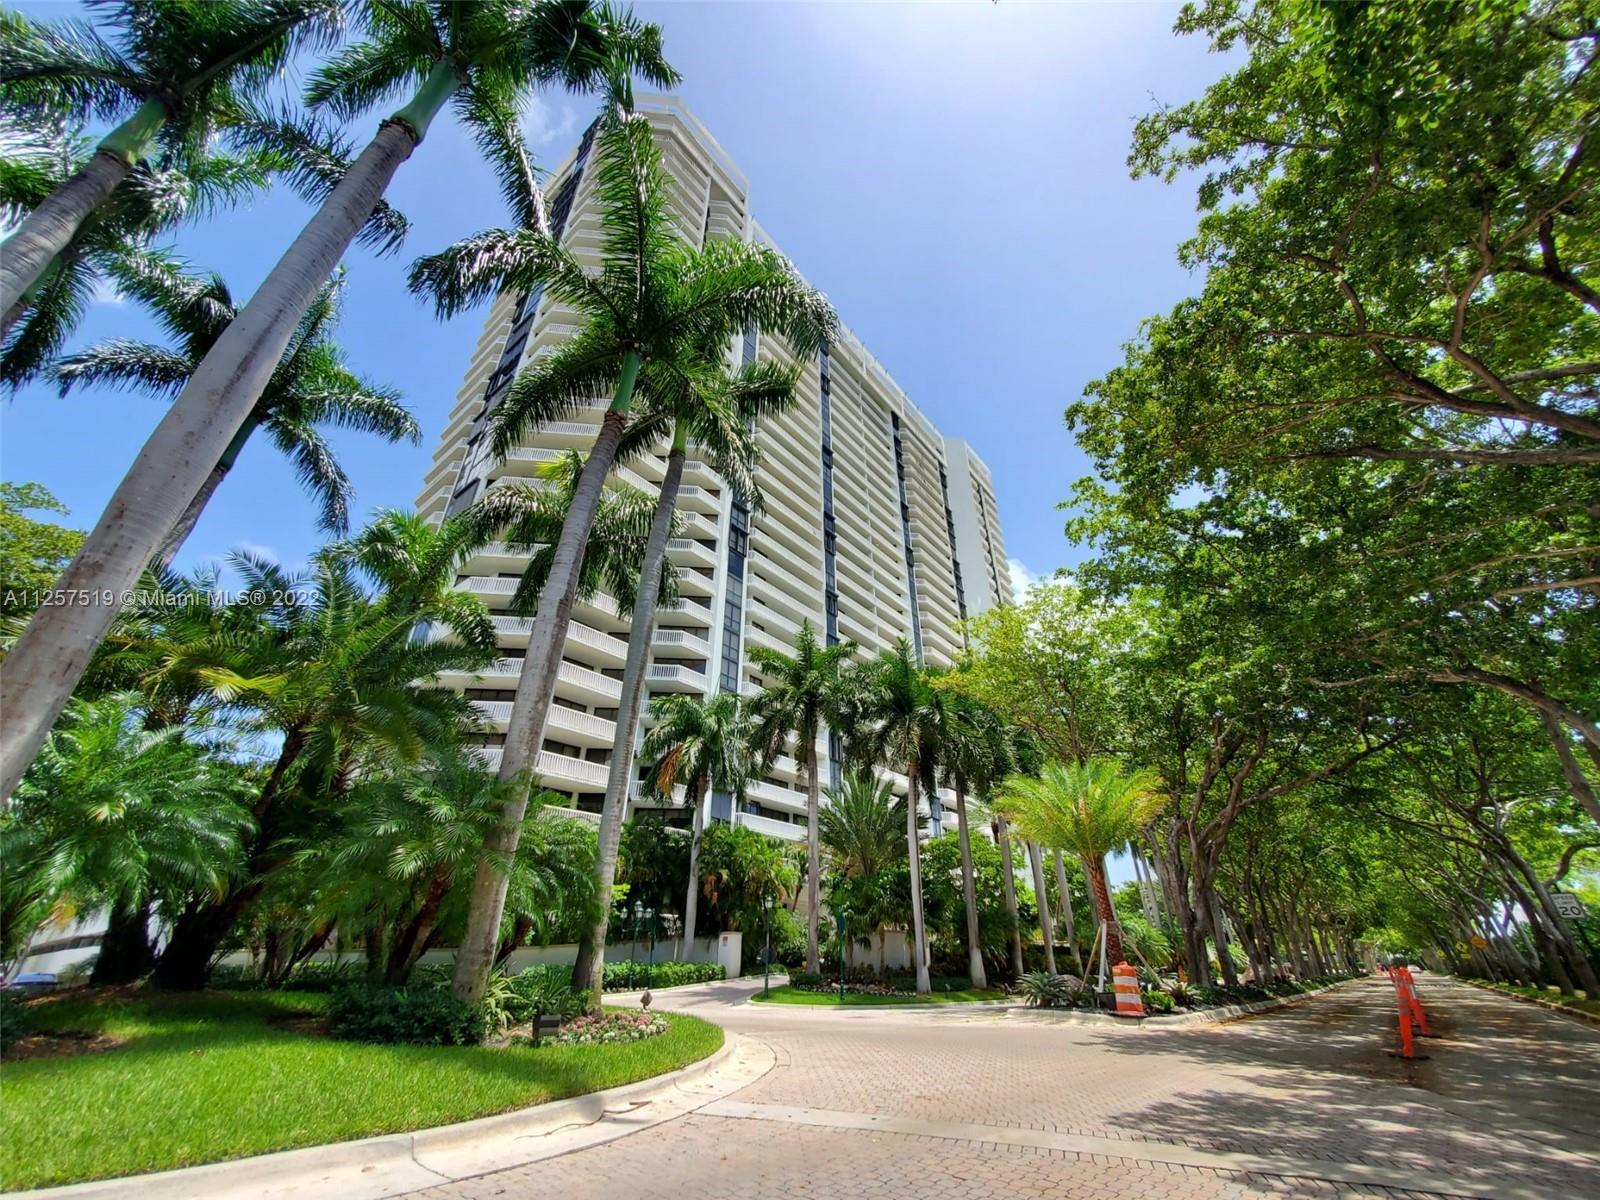 AMAZING 2/2 CONDO LOCATED AT DESIRABLE WILLIAM ISLAND. BREATHTAKING BAY AND CITY VIEWS FROM EVERY WI